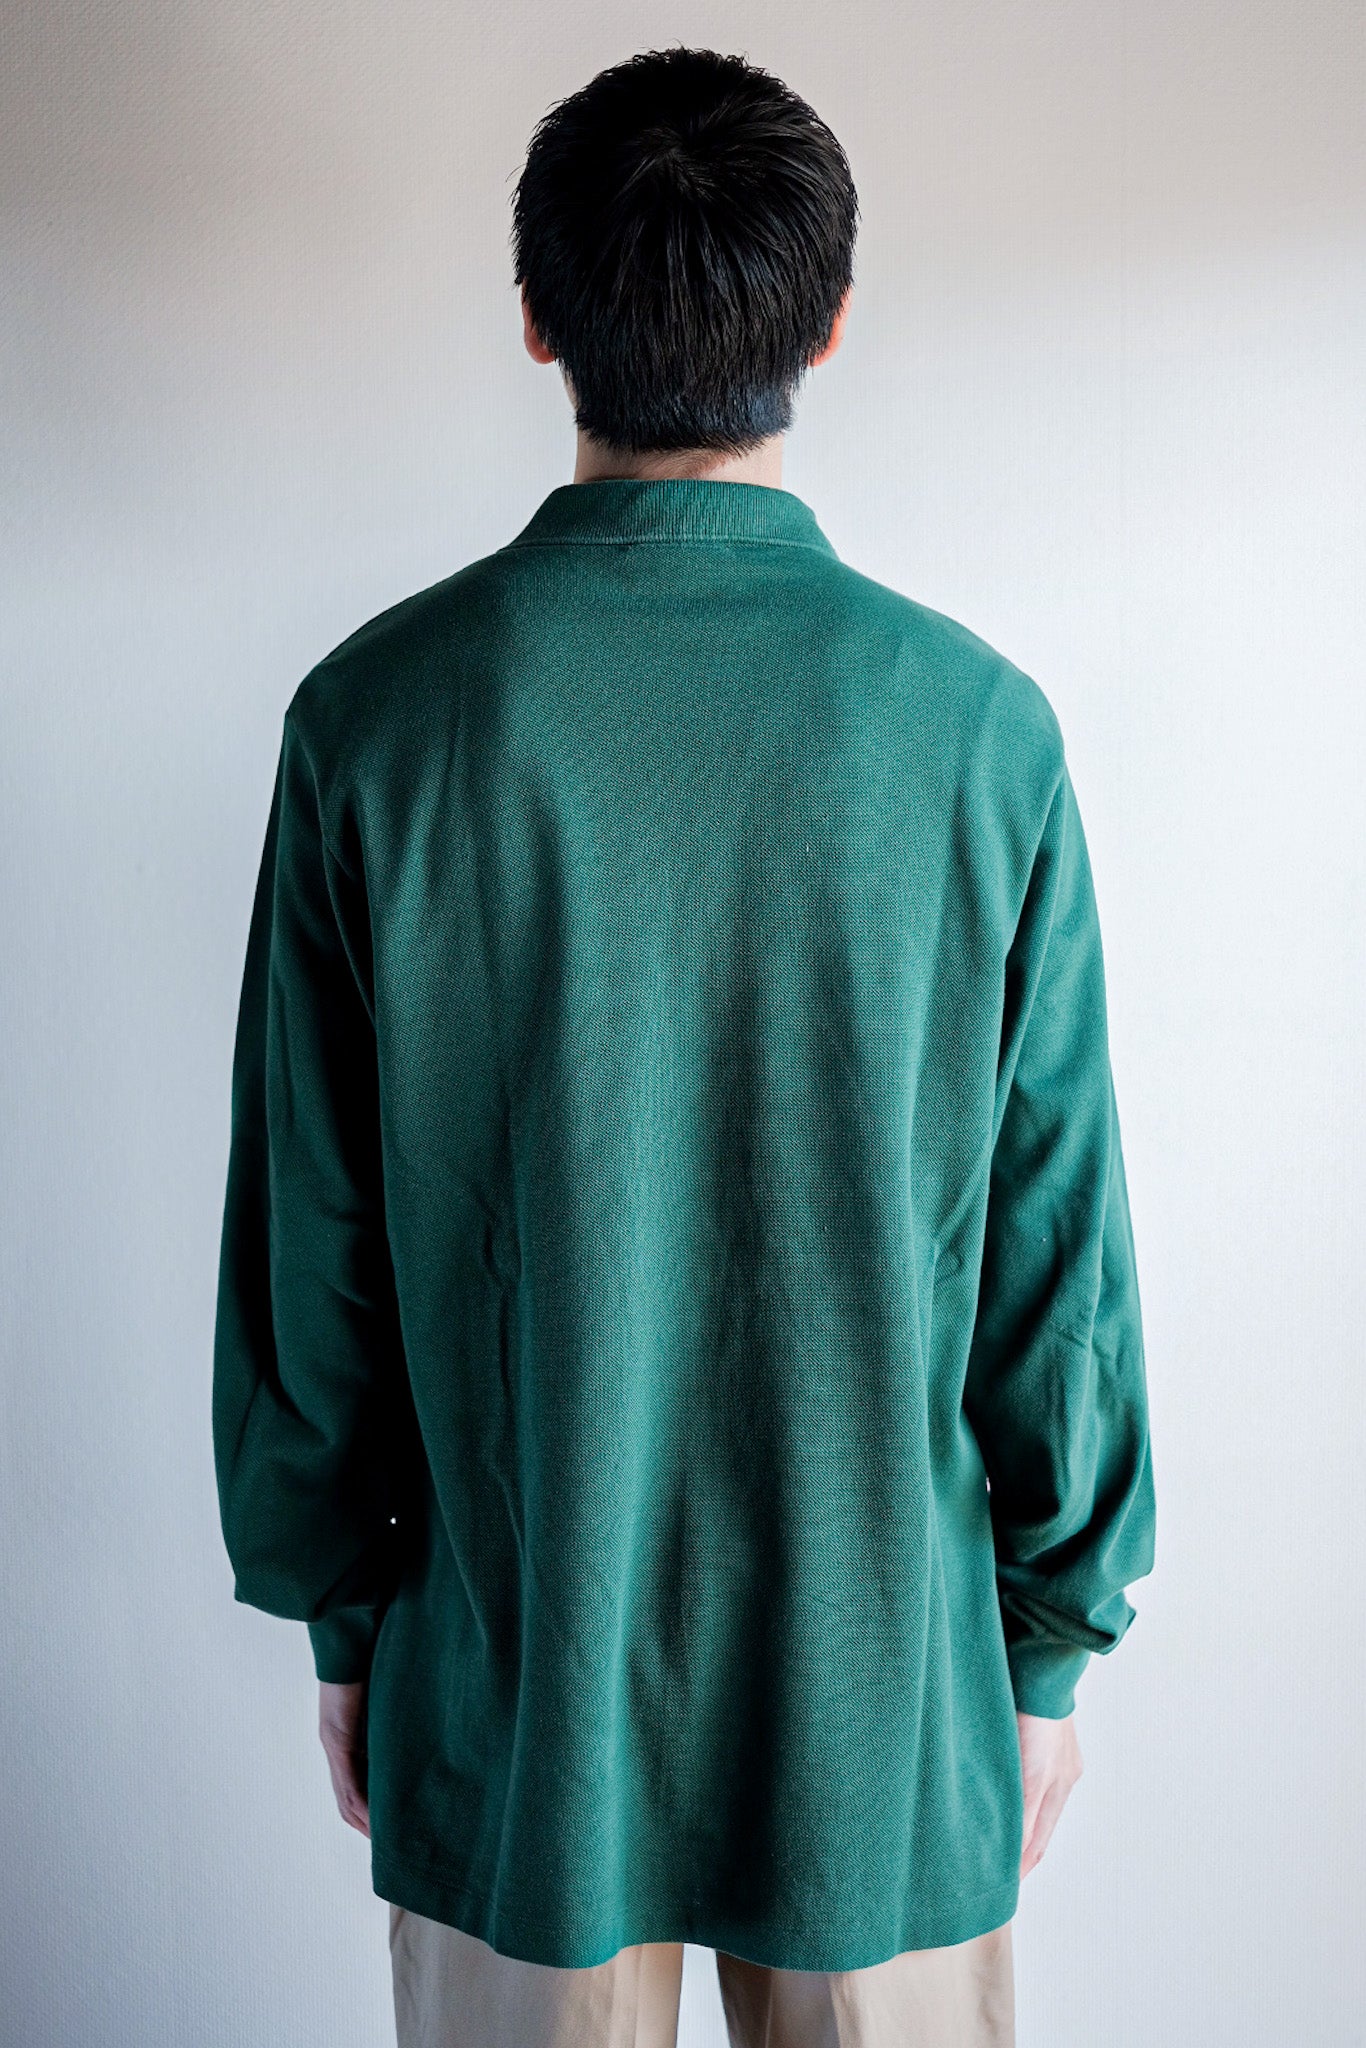 【~80's】CHEMISE LACOSTE L/S Polo Shirt Size.5 "Forest Green"